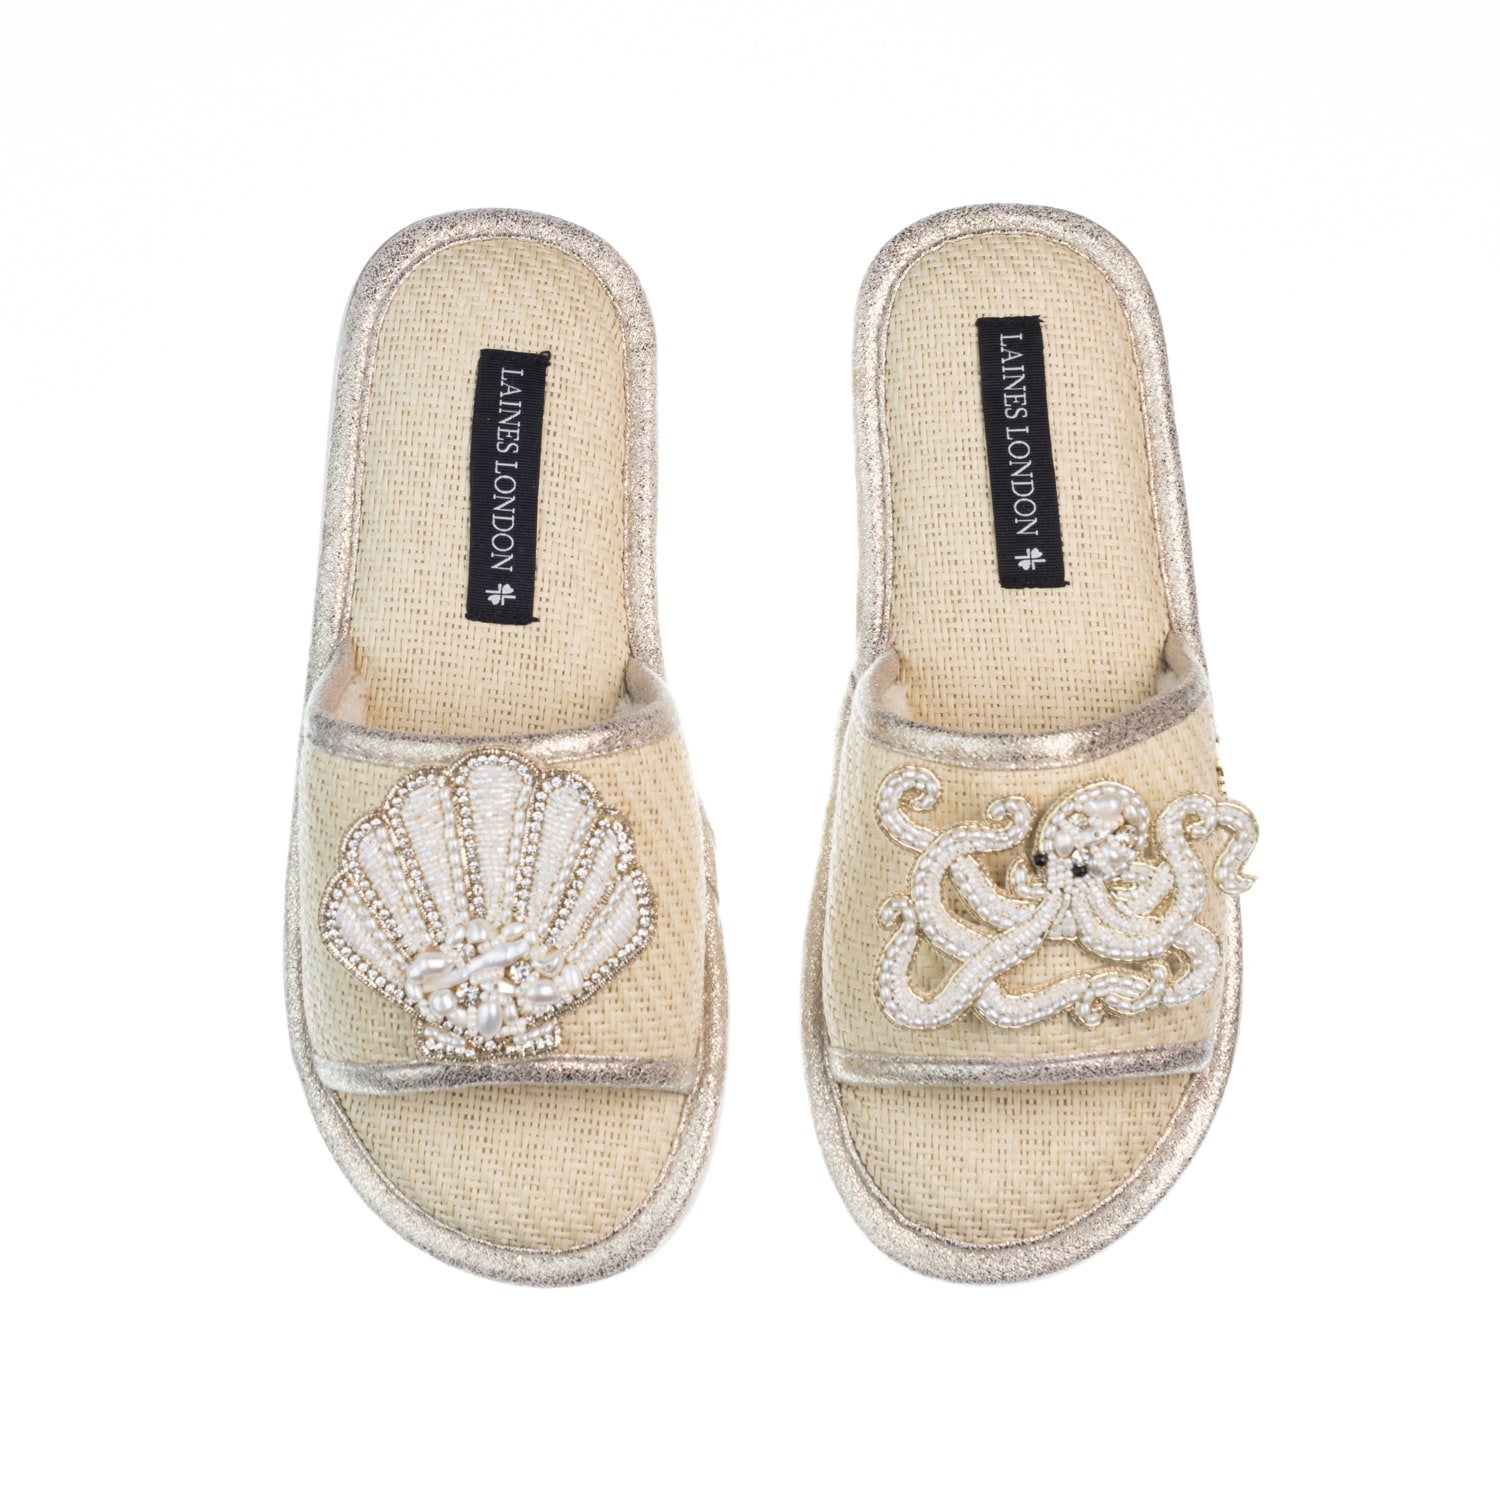 Laines London Women's White Straw Braided Sandals With Beaded Shell & Octopus Brooches - Cream